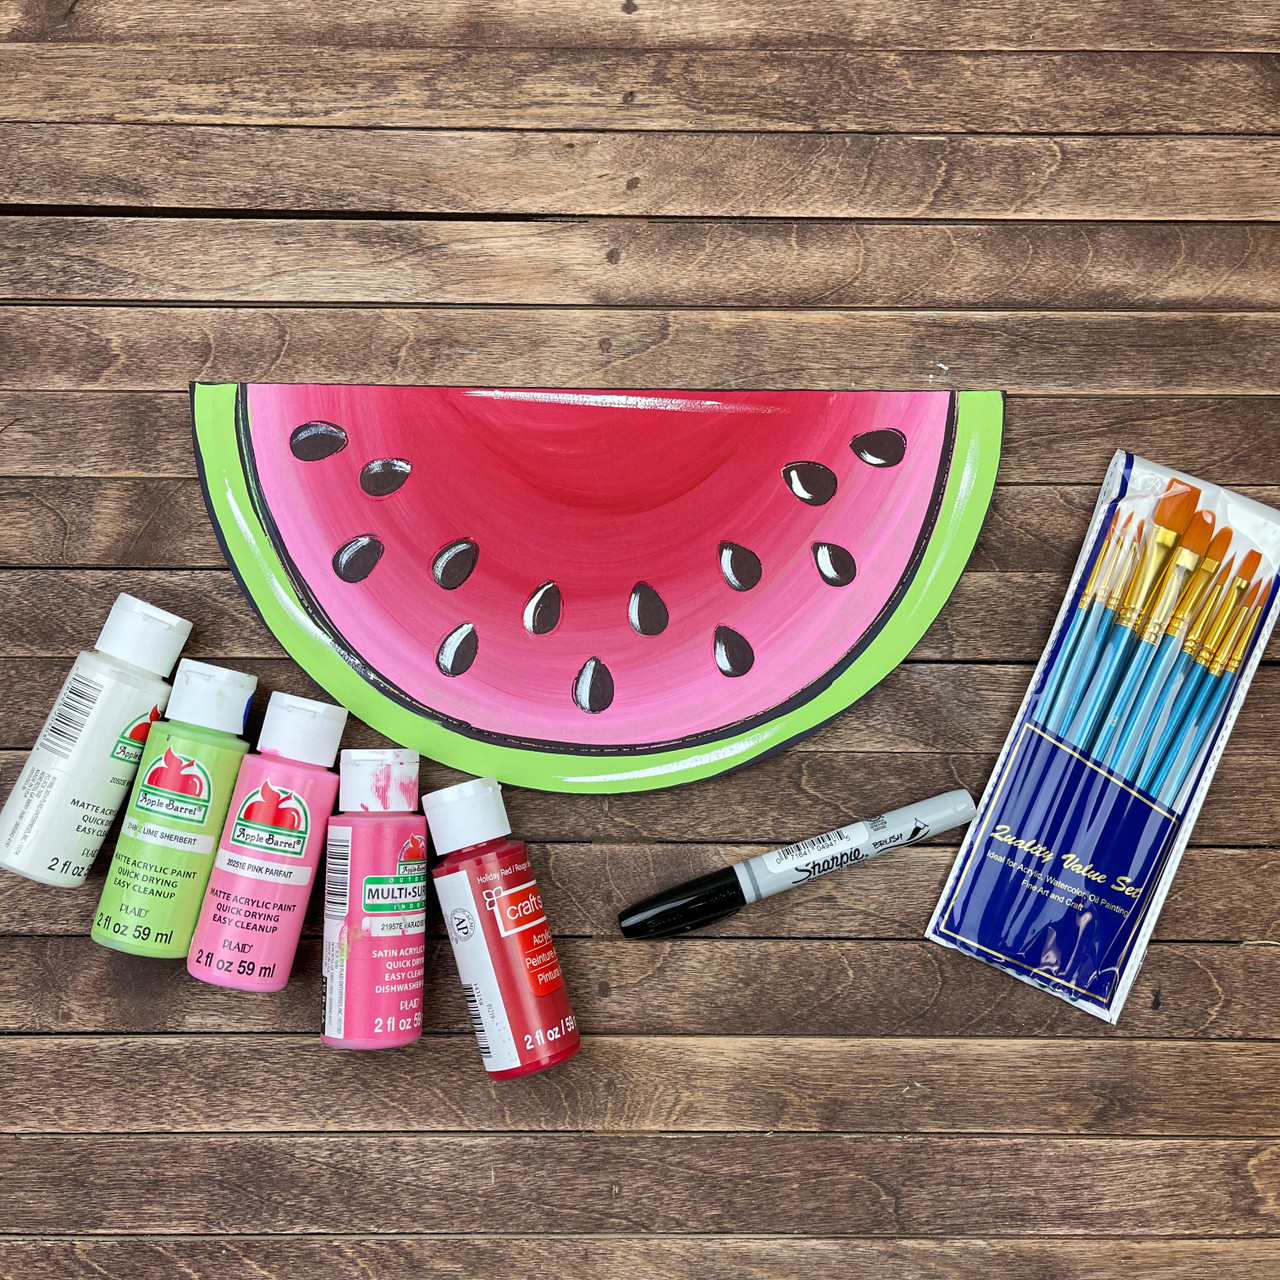 Wood Canvas Painting Watermelon Craft Kit for Kids DIY Kit Home